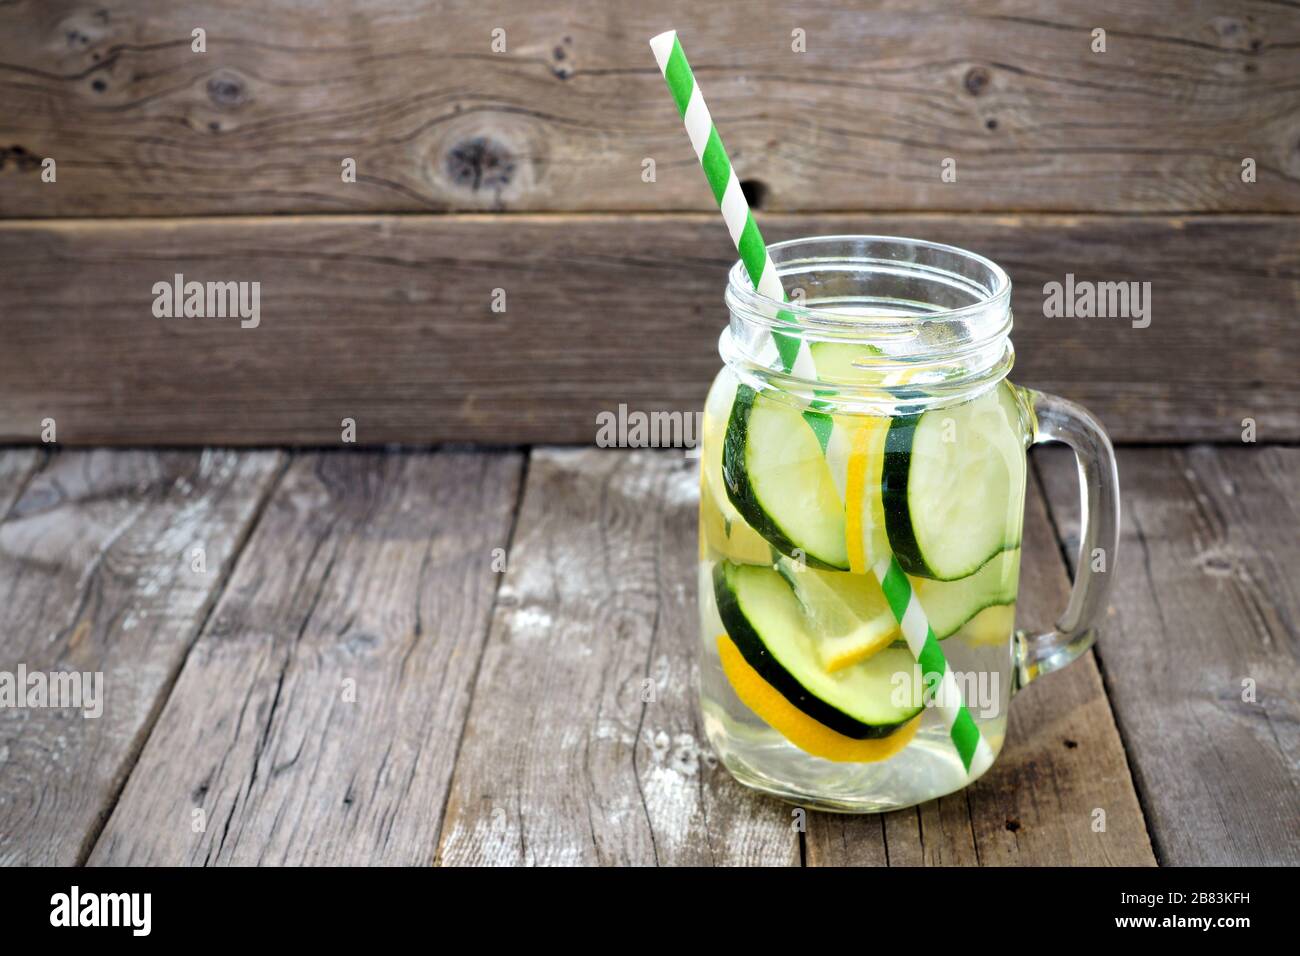 Lemon cucumber detox water in a mason jar glass with straw against a rustic wood background Stock Photo